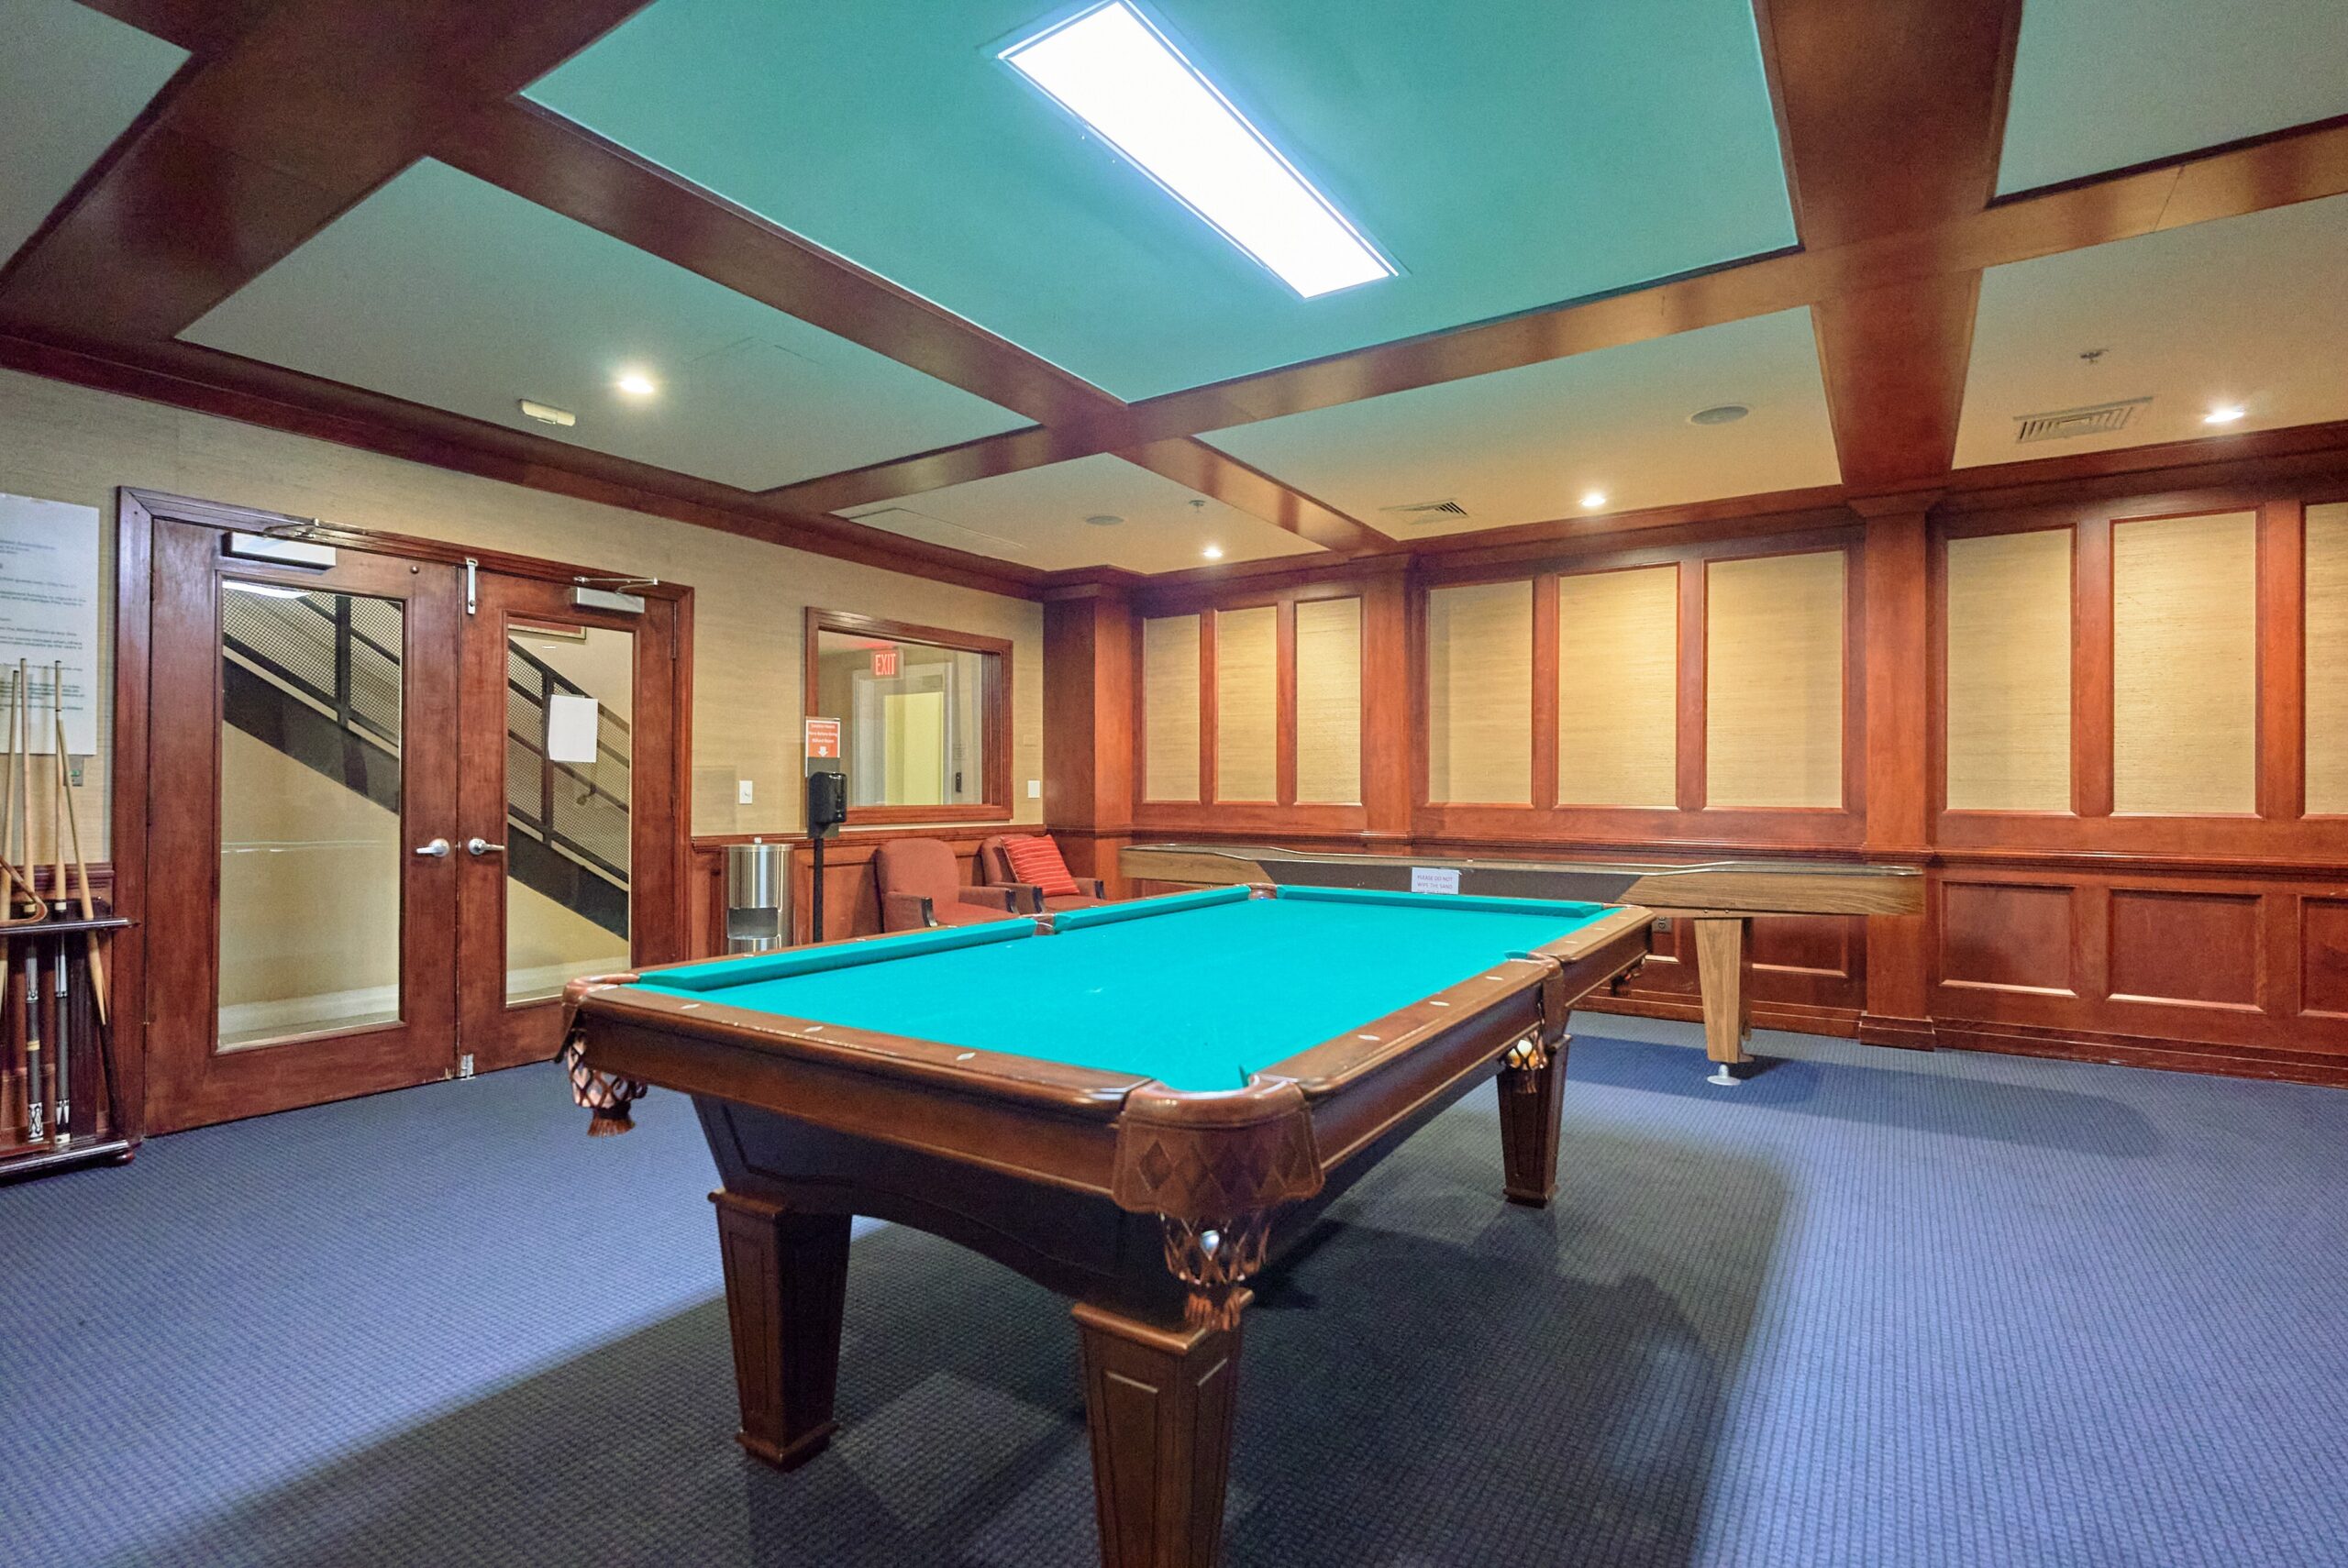 Game room in luxury condo building with billiards table and shuffleboard table visible.